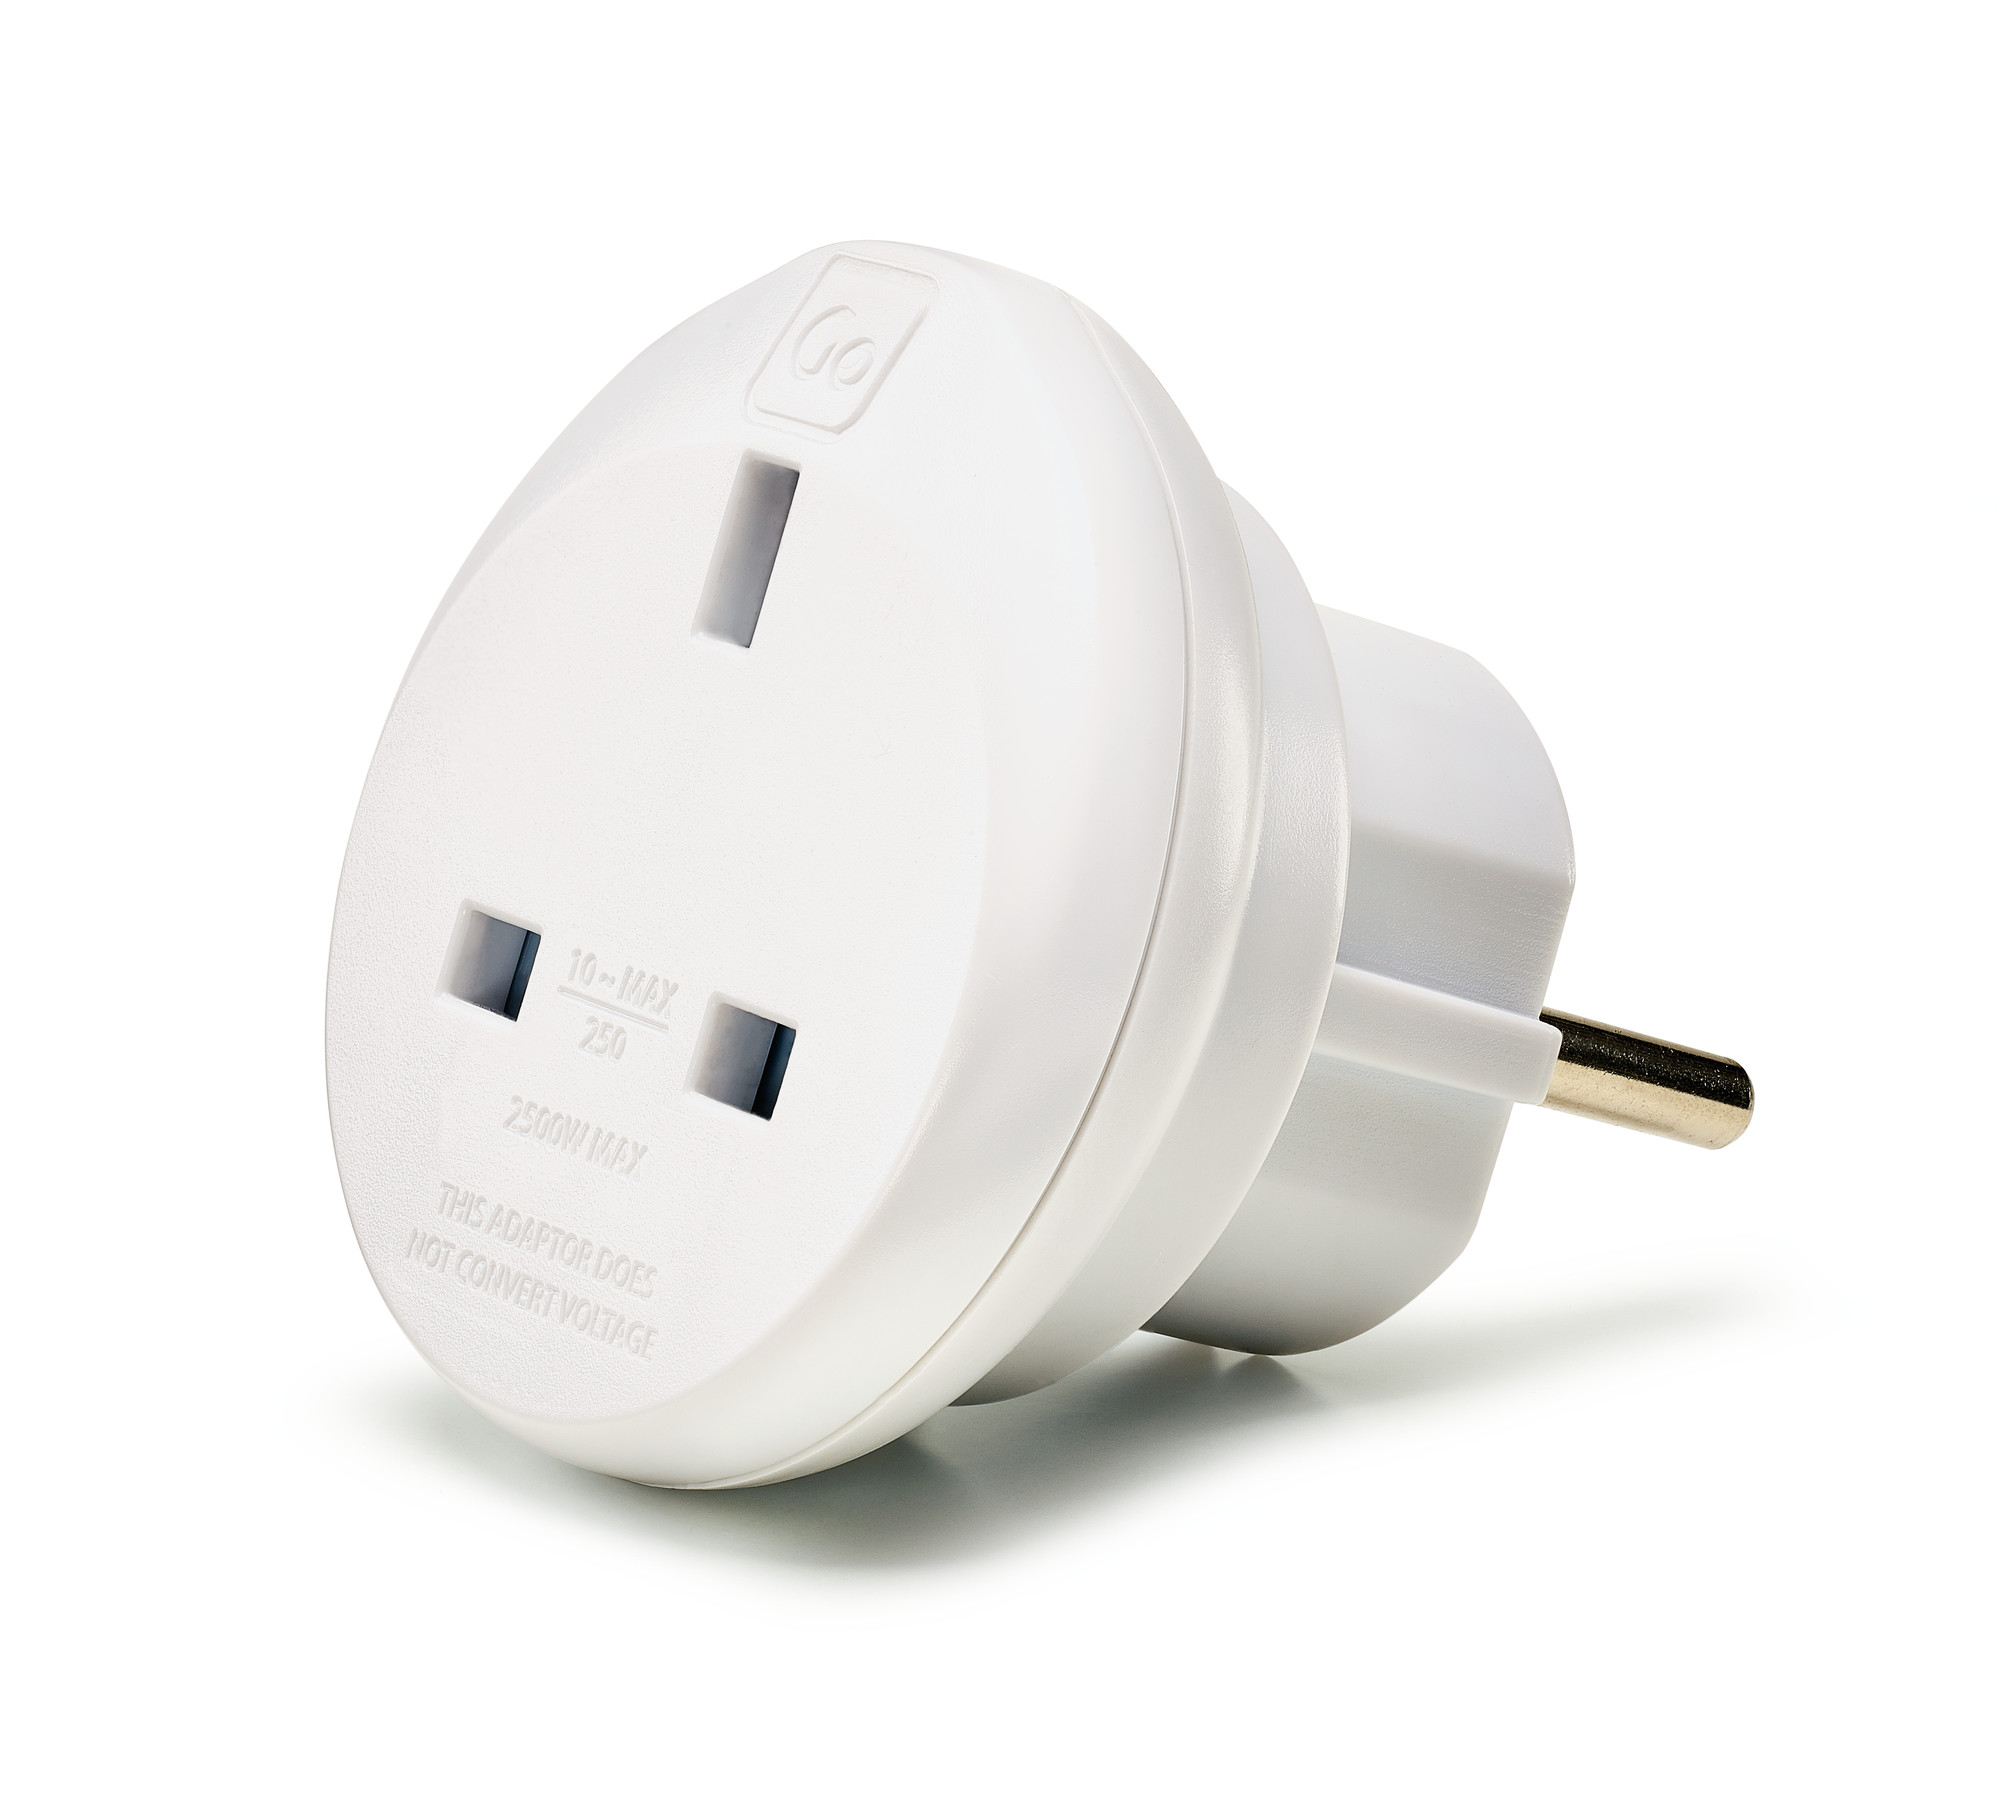 Picture of Go Travel UK Eu Single Adapter